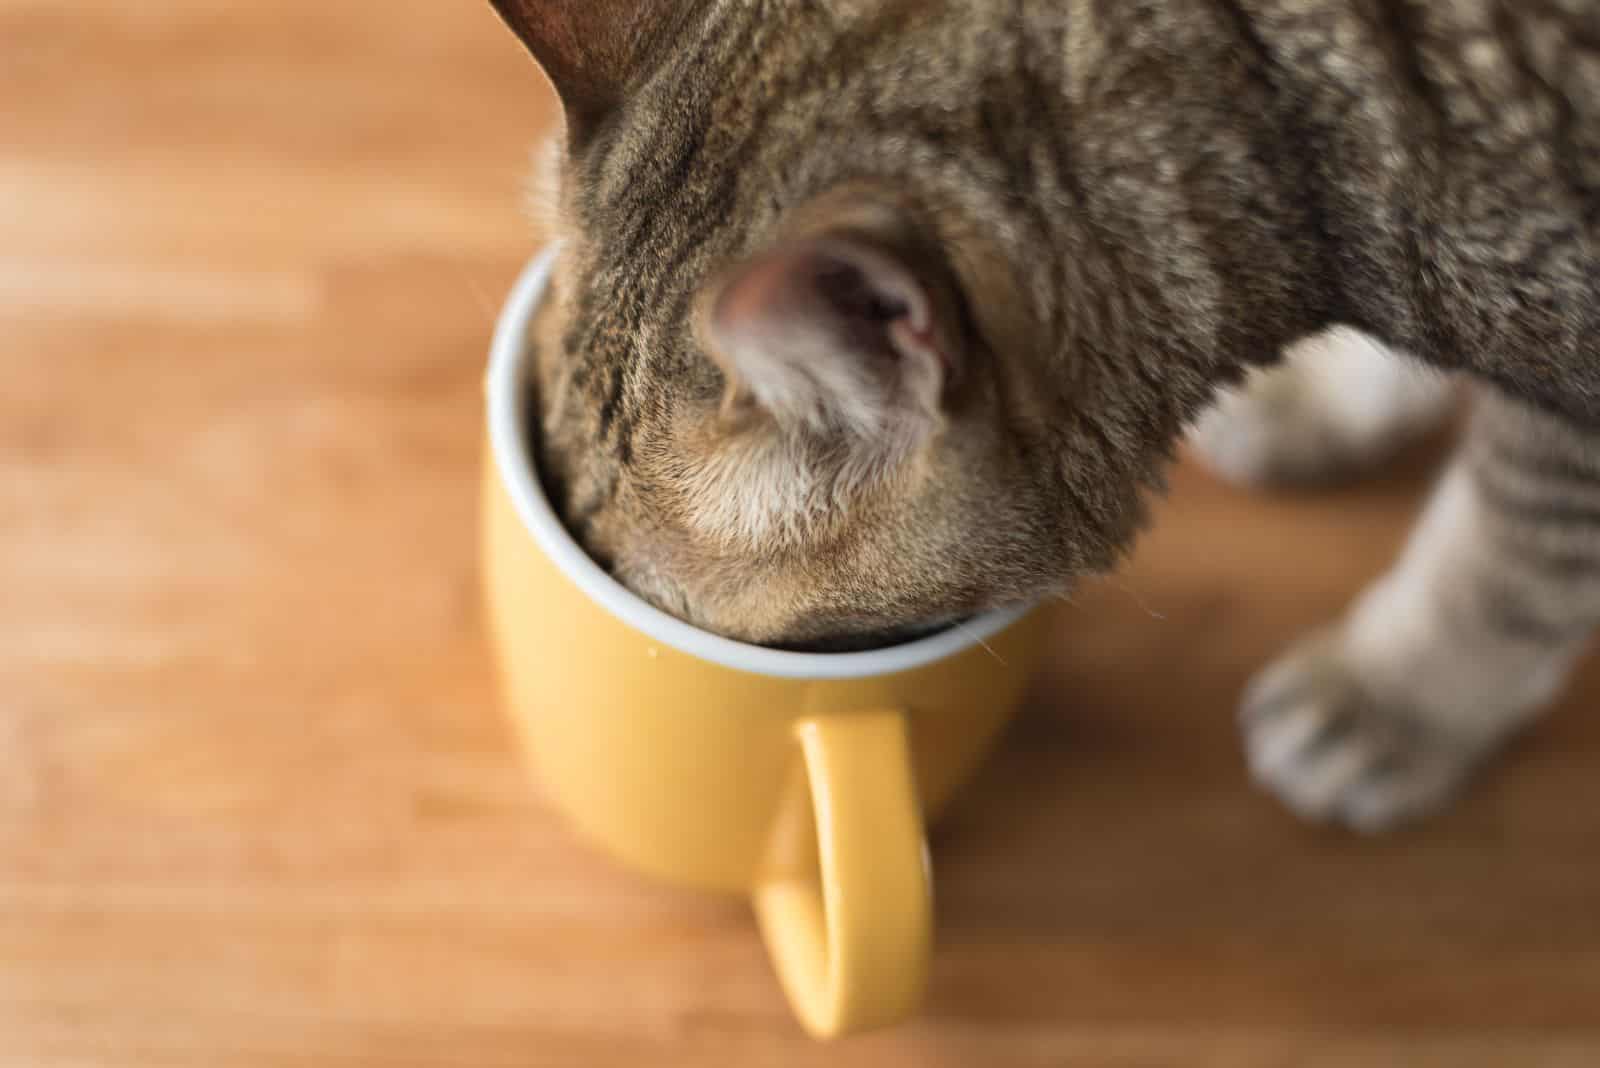 cat eating from a cup